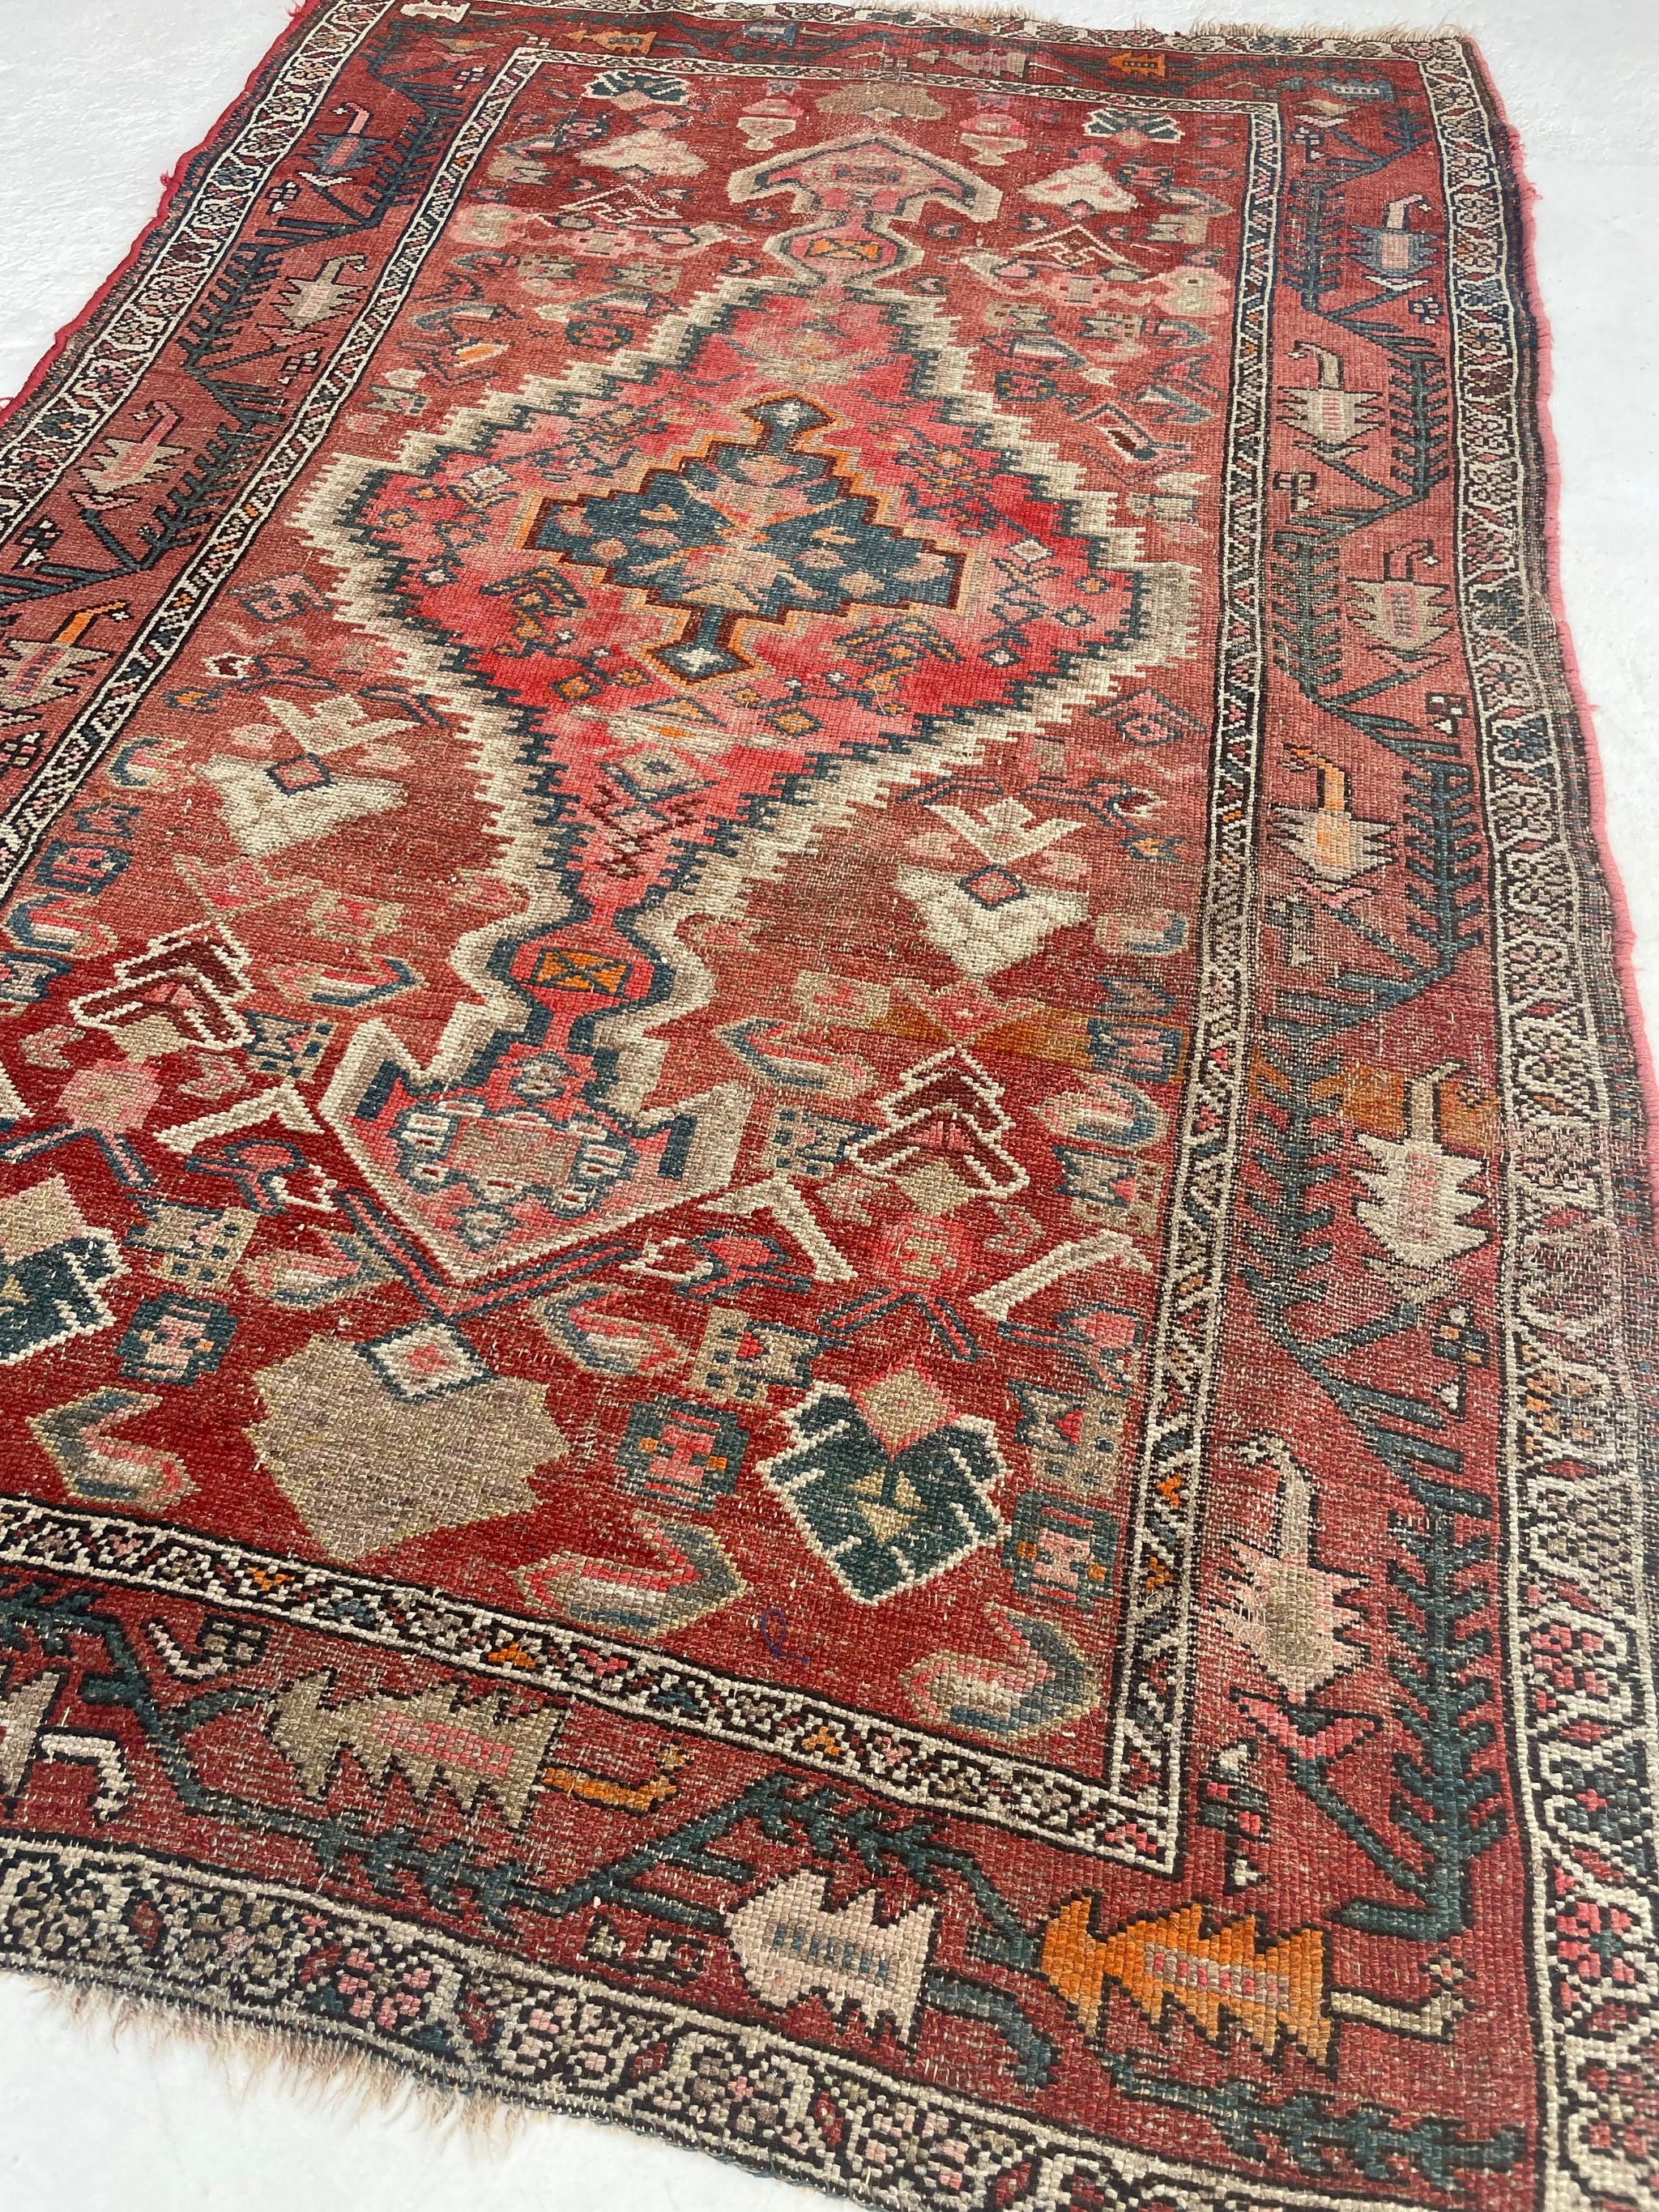 Unique Kilim Design Antique Malayer With Beautiful Palette

Size: 3.10 x 6
Age: Antique, C. 1930's
Pile: Low/Medium pile, incredible condition for its age

This rug is one-of-a-kind, only one in the world, no others are available.

Because of the